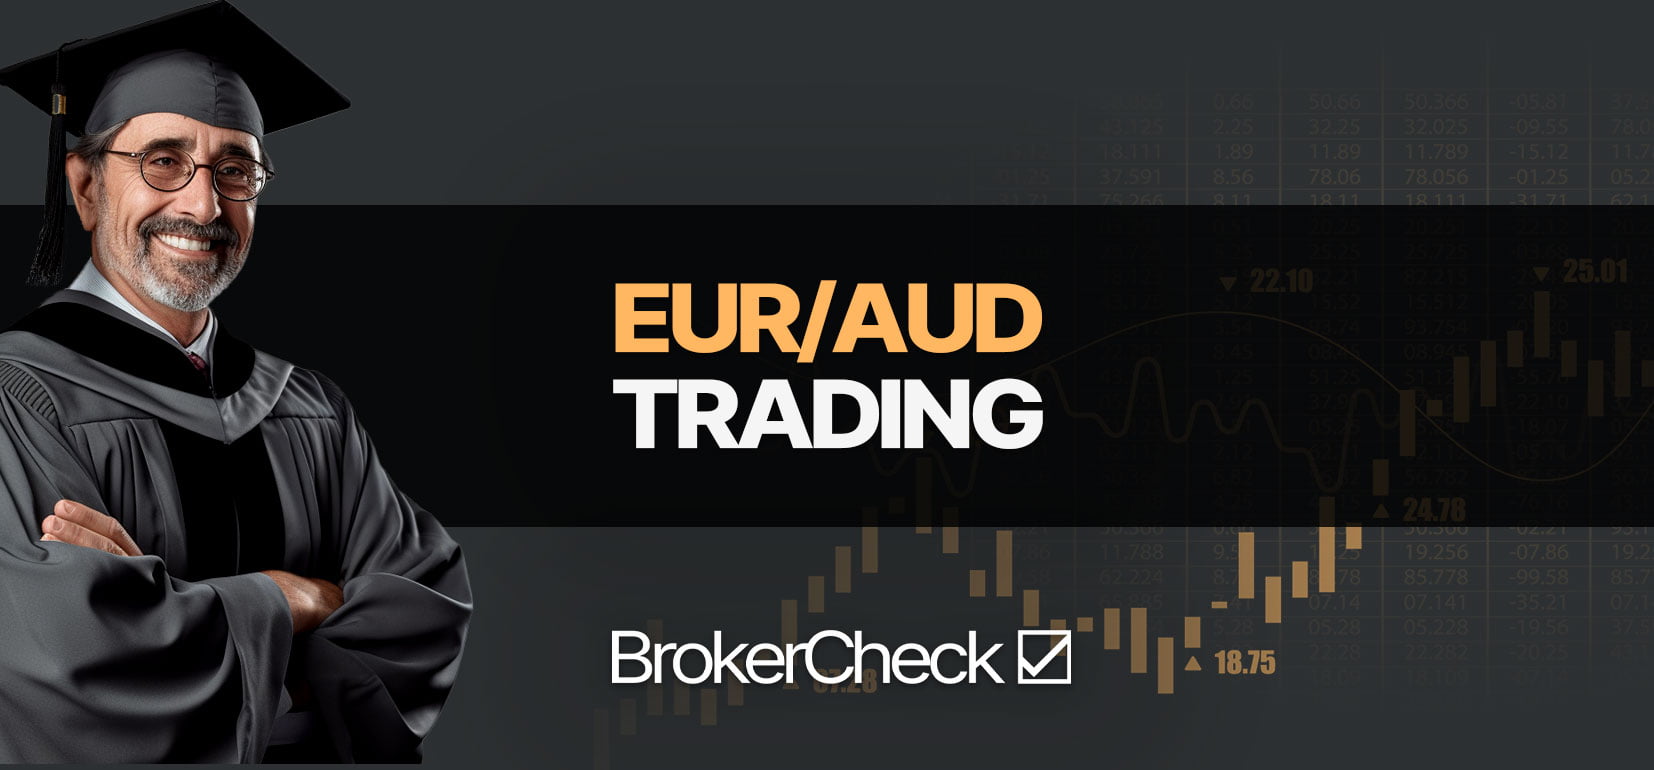 How To Trade EUR/AUD успешно